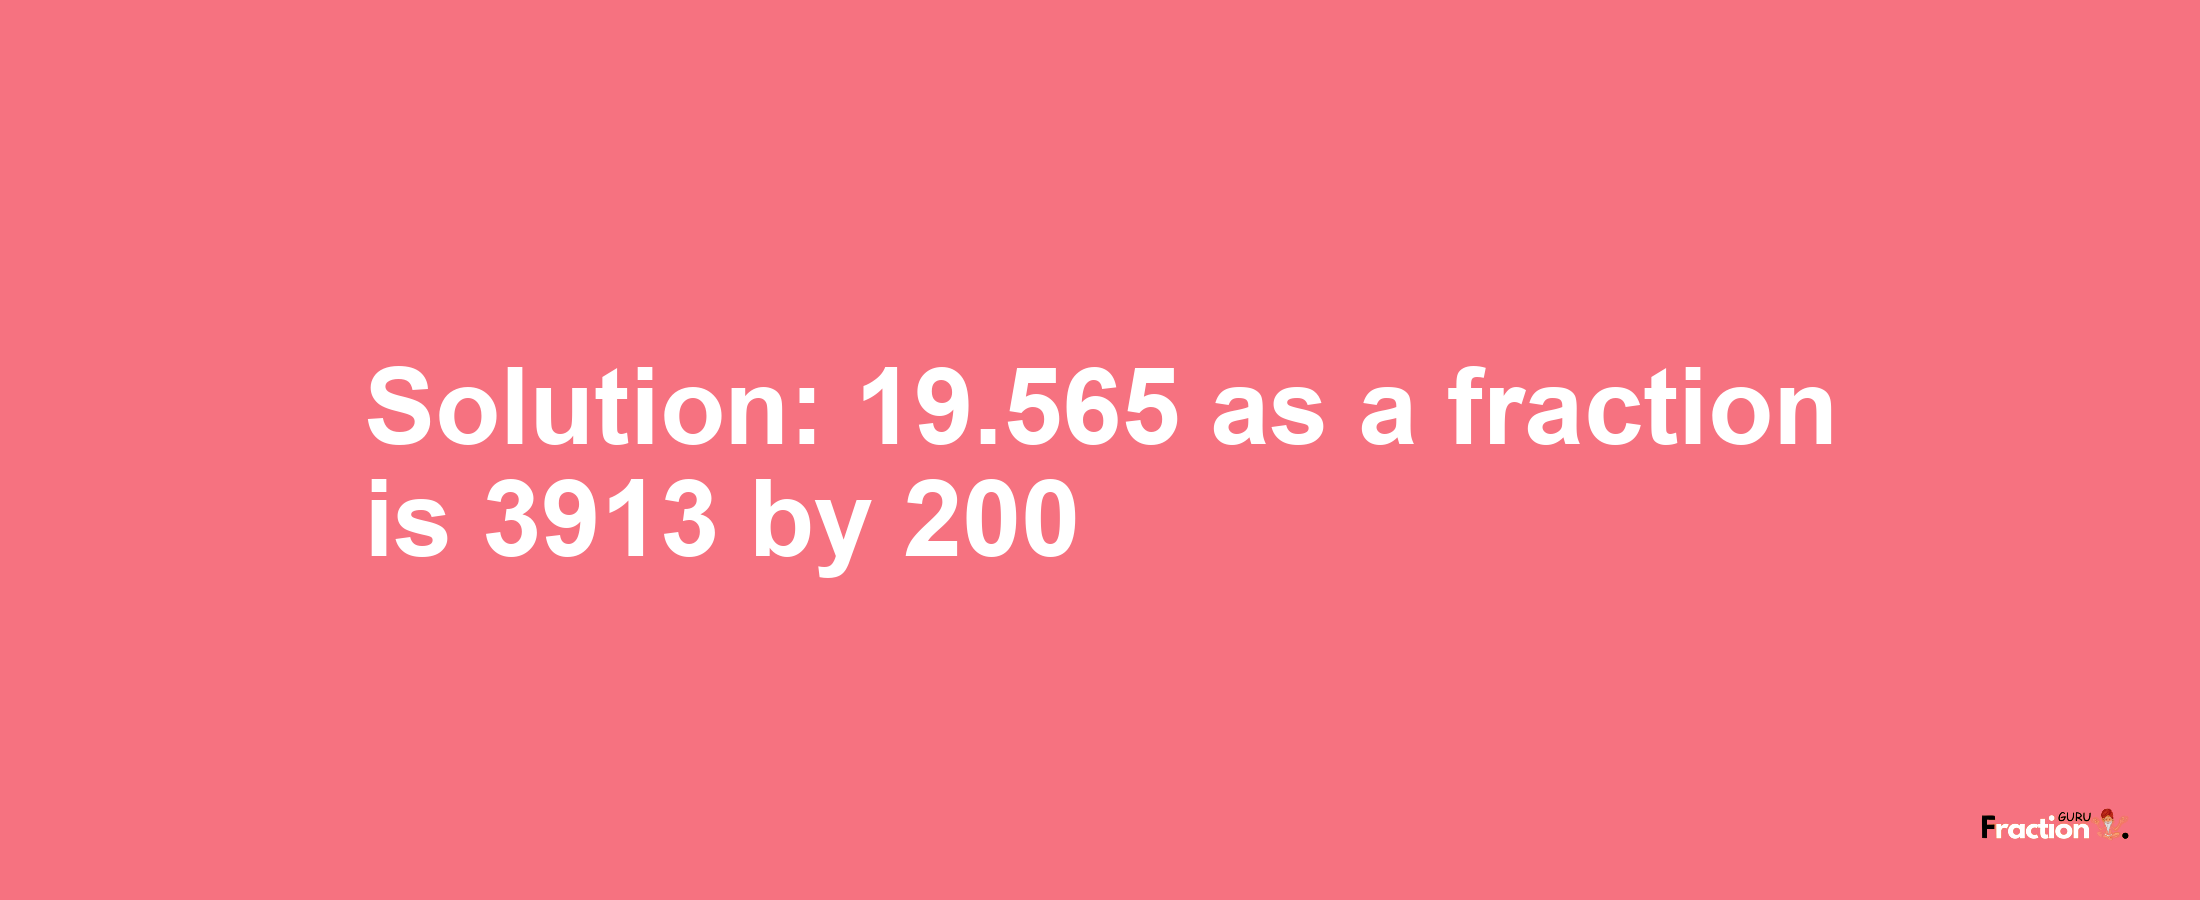 Solution:19.565 as a fraction is 3913/200